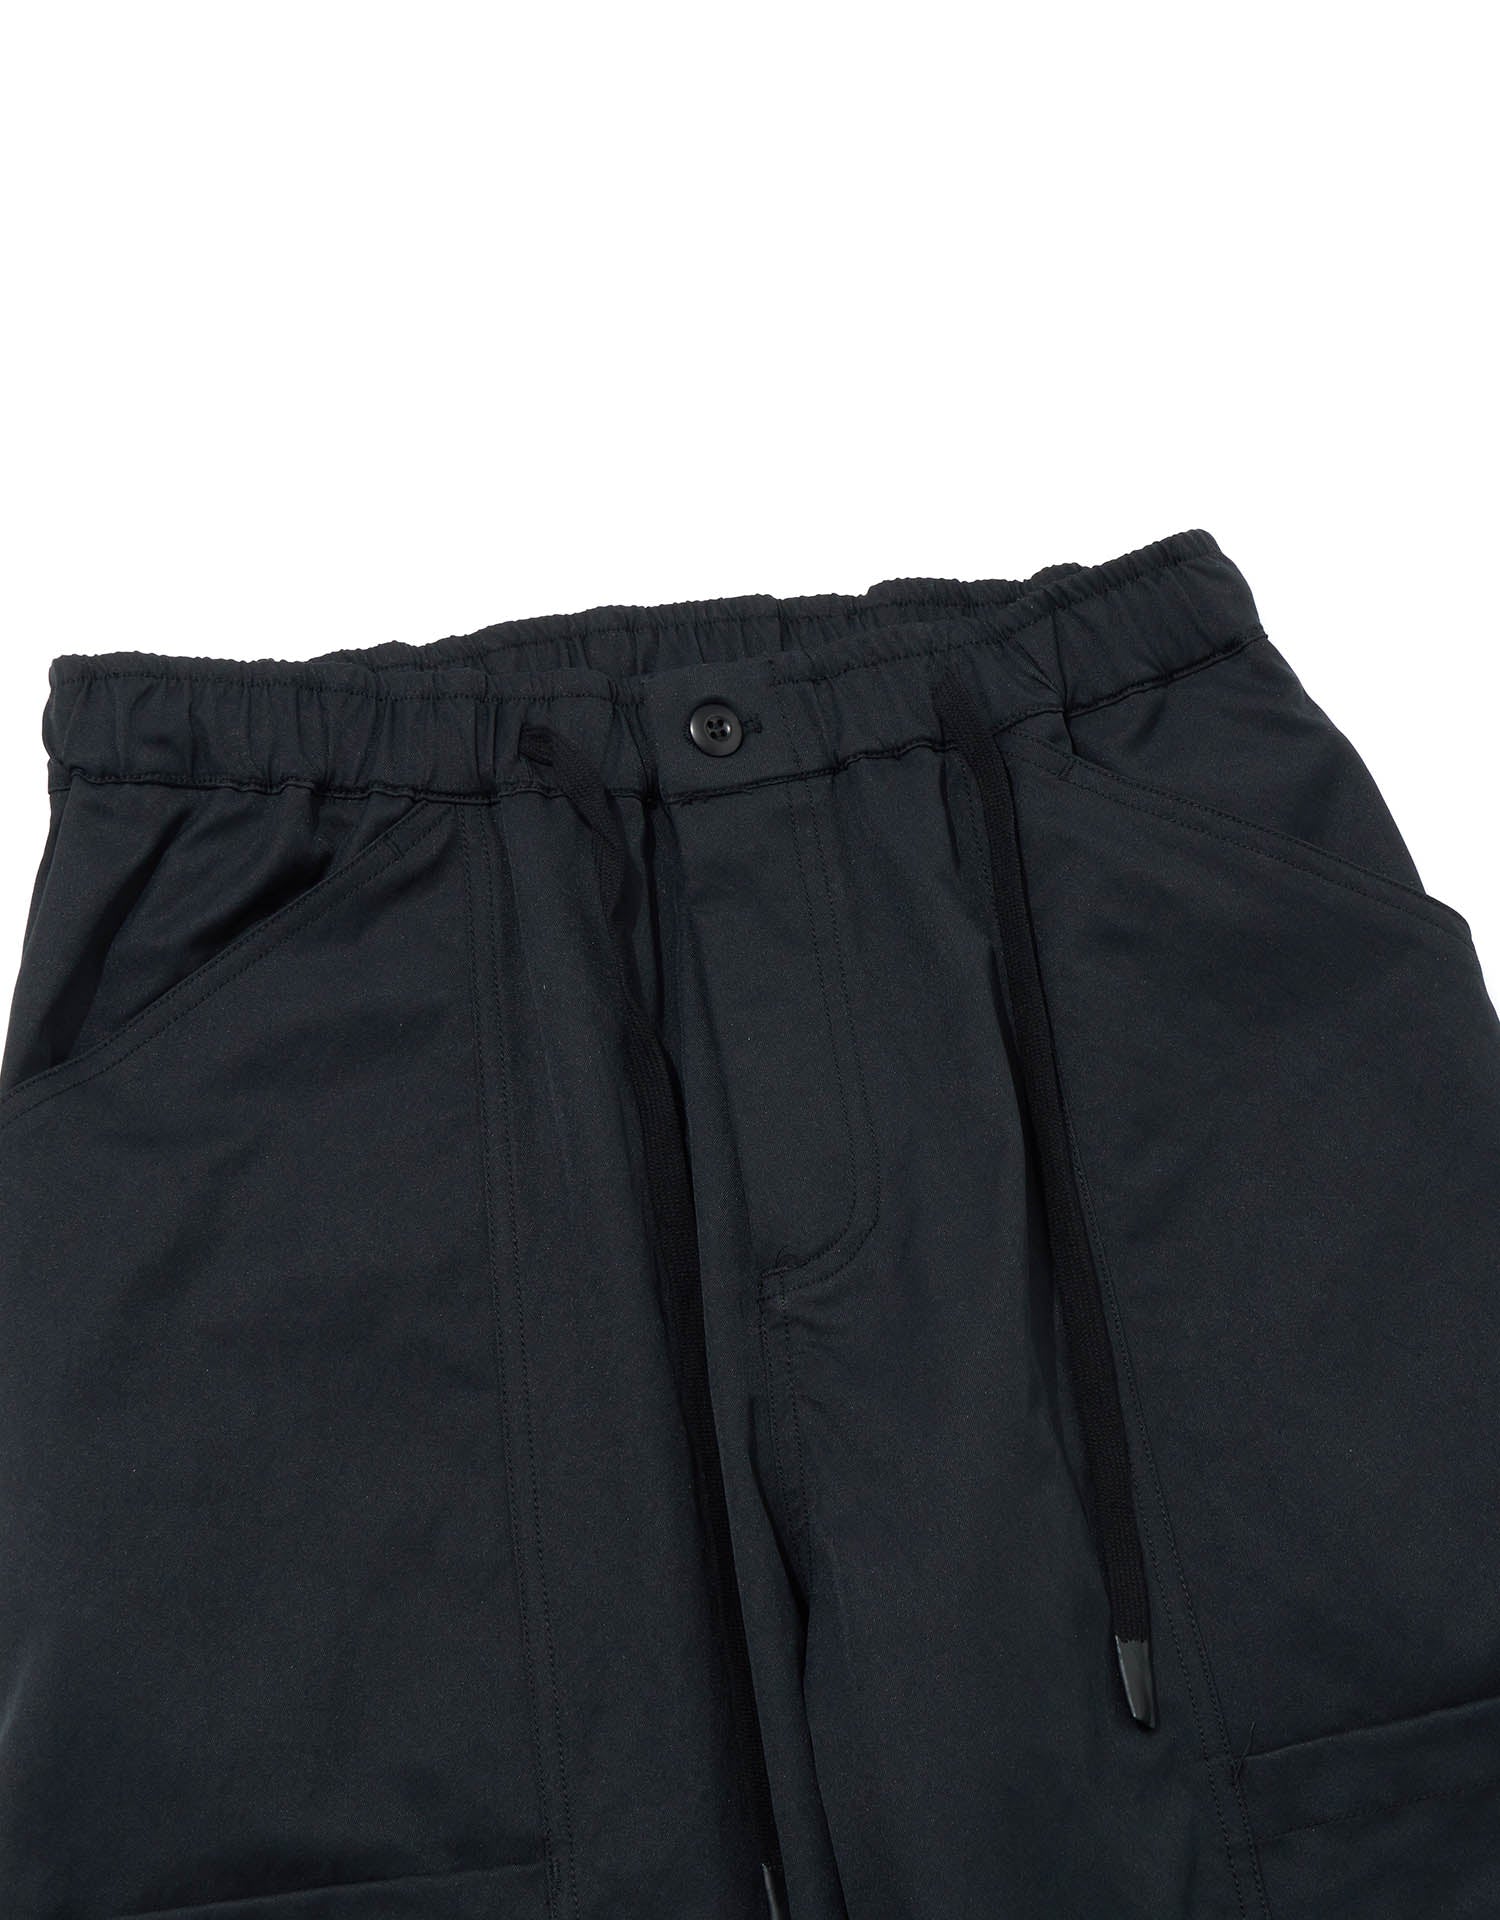 TopBasics Four Pockets Cargo Relaxed Pants